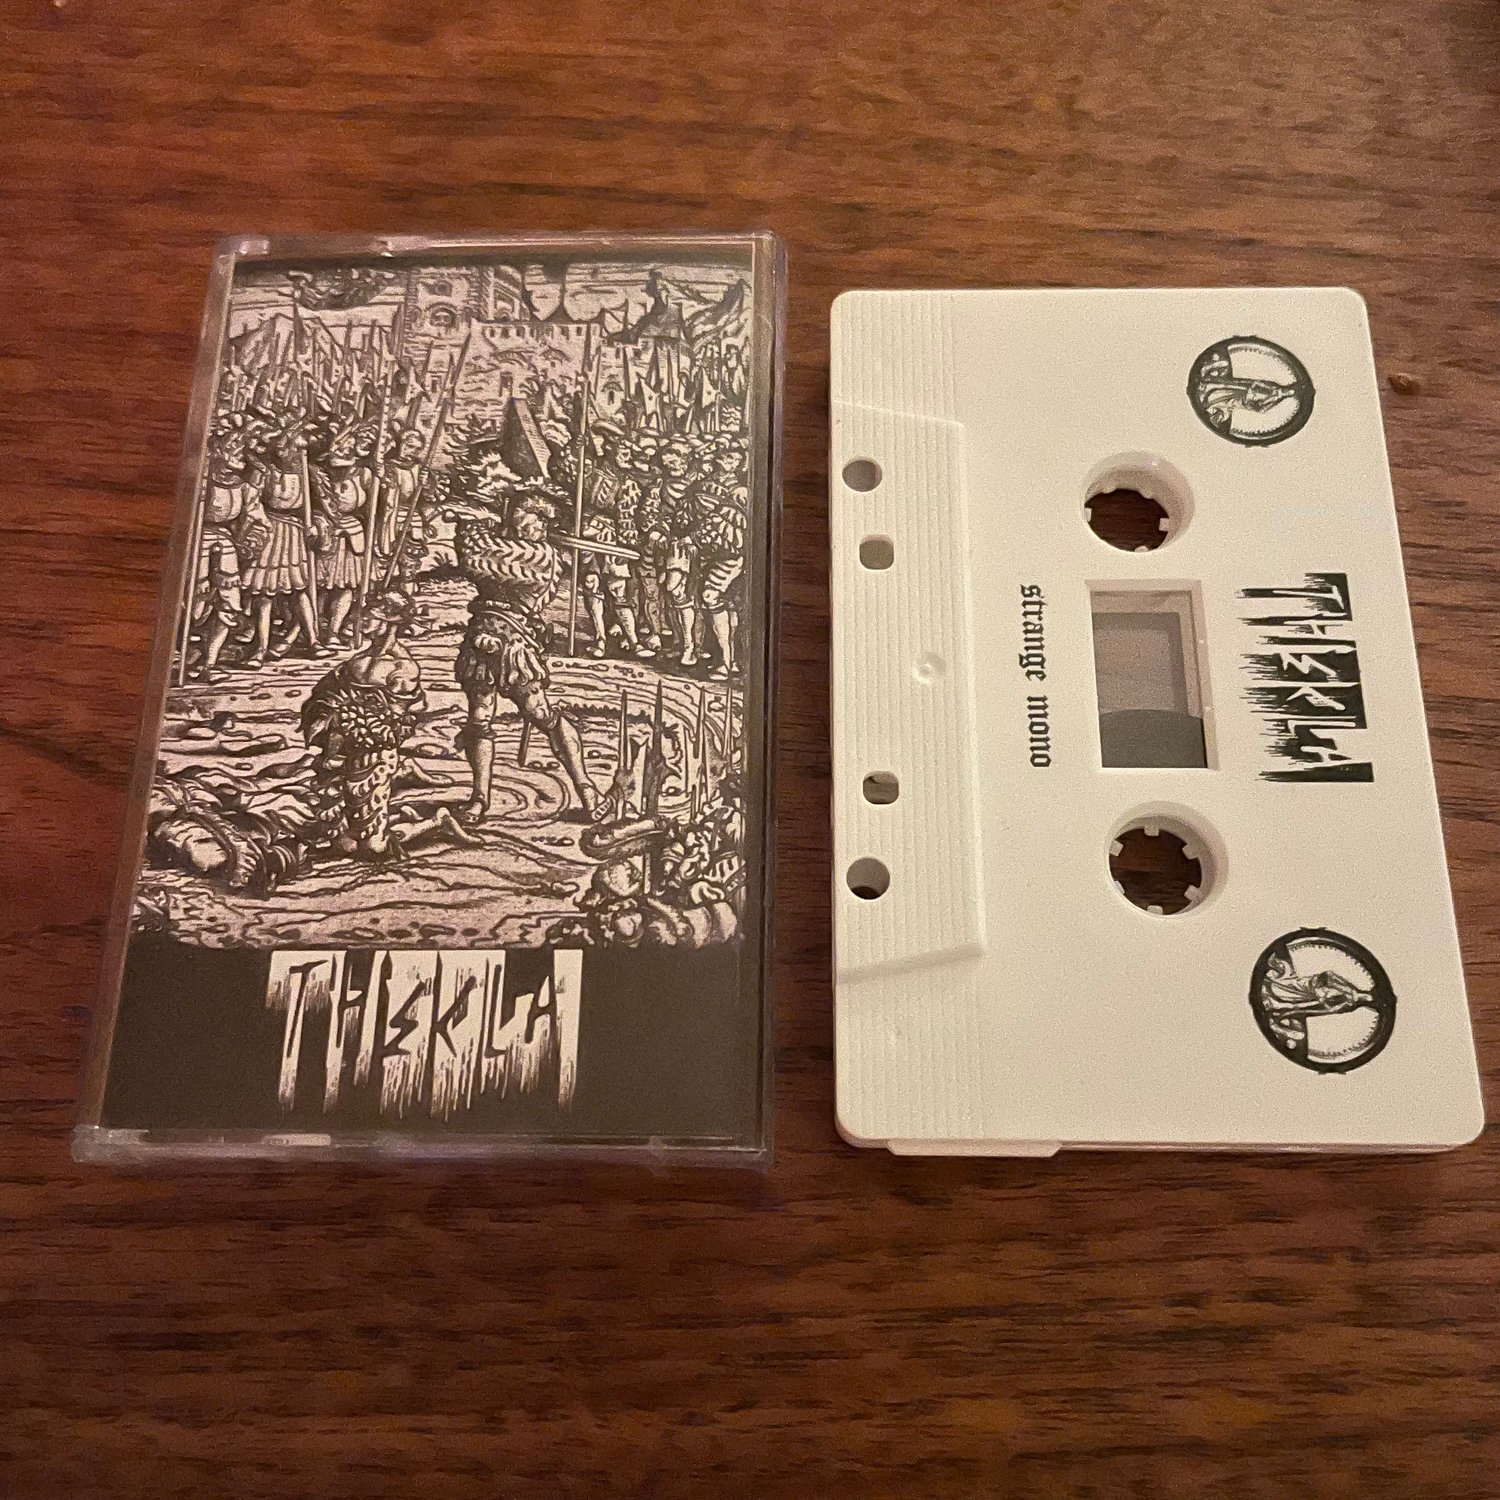 Thecla - My Sojourn Among The Torturers